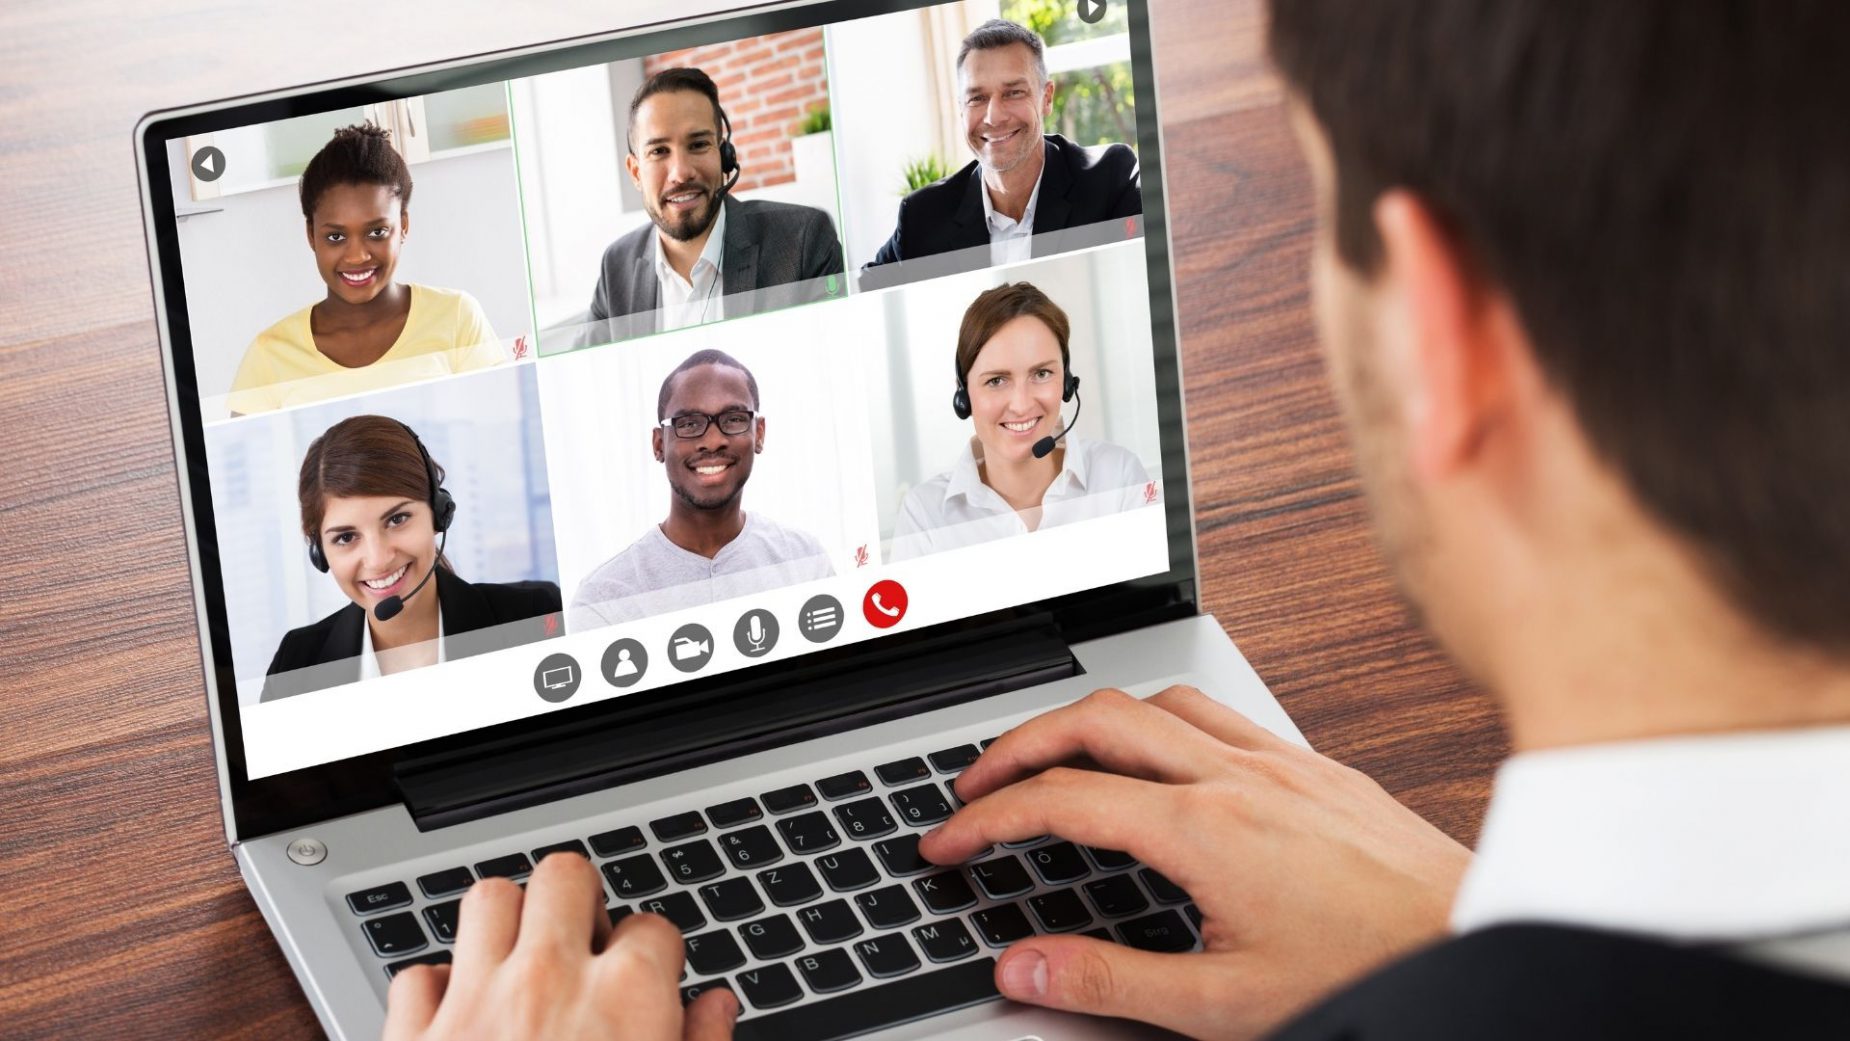 Global Video Conferencing Market Overview And Prospects